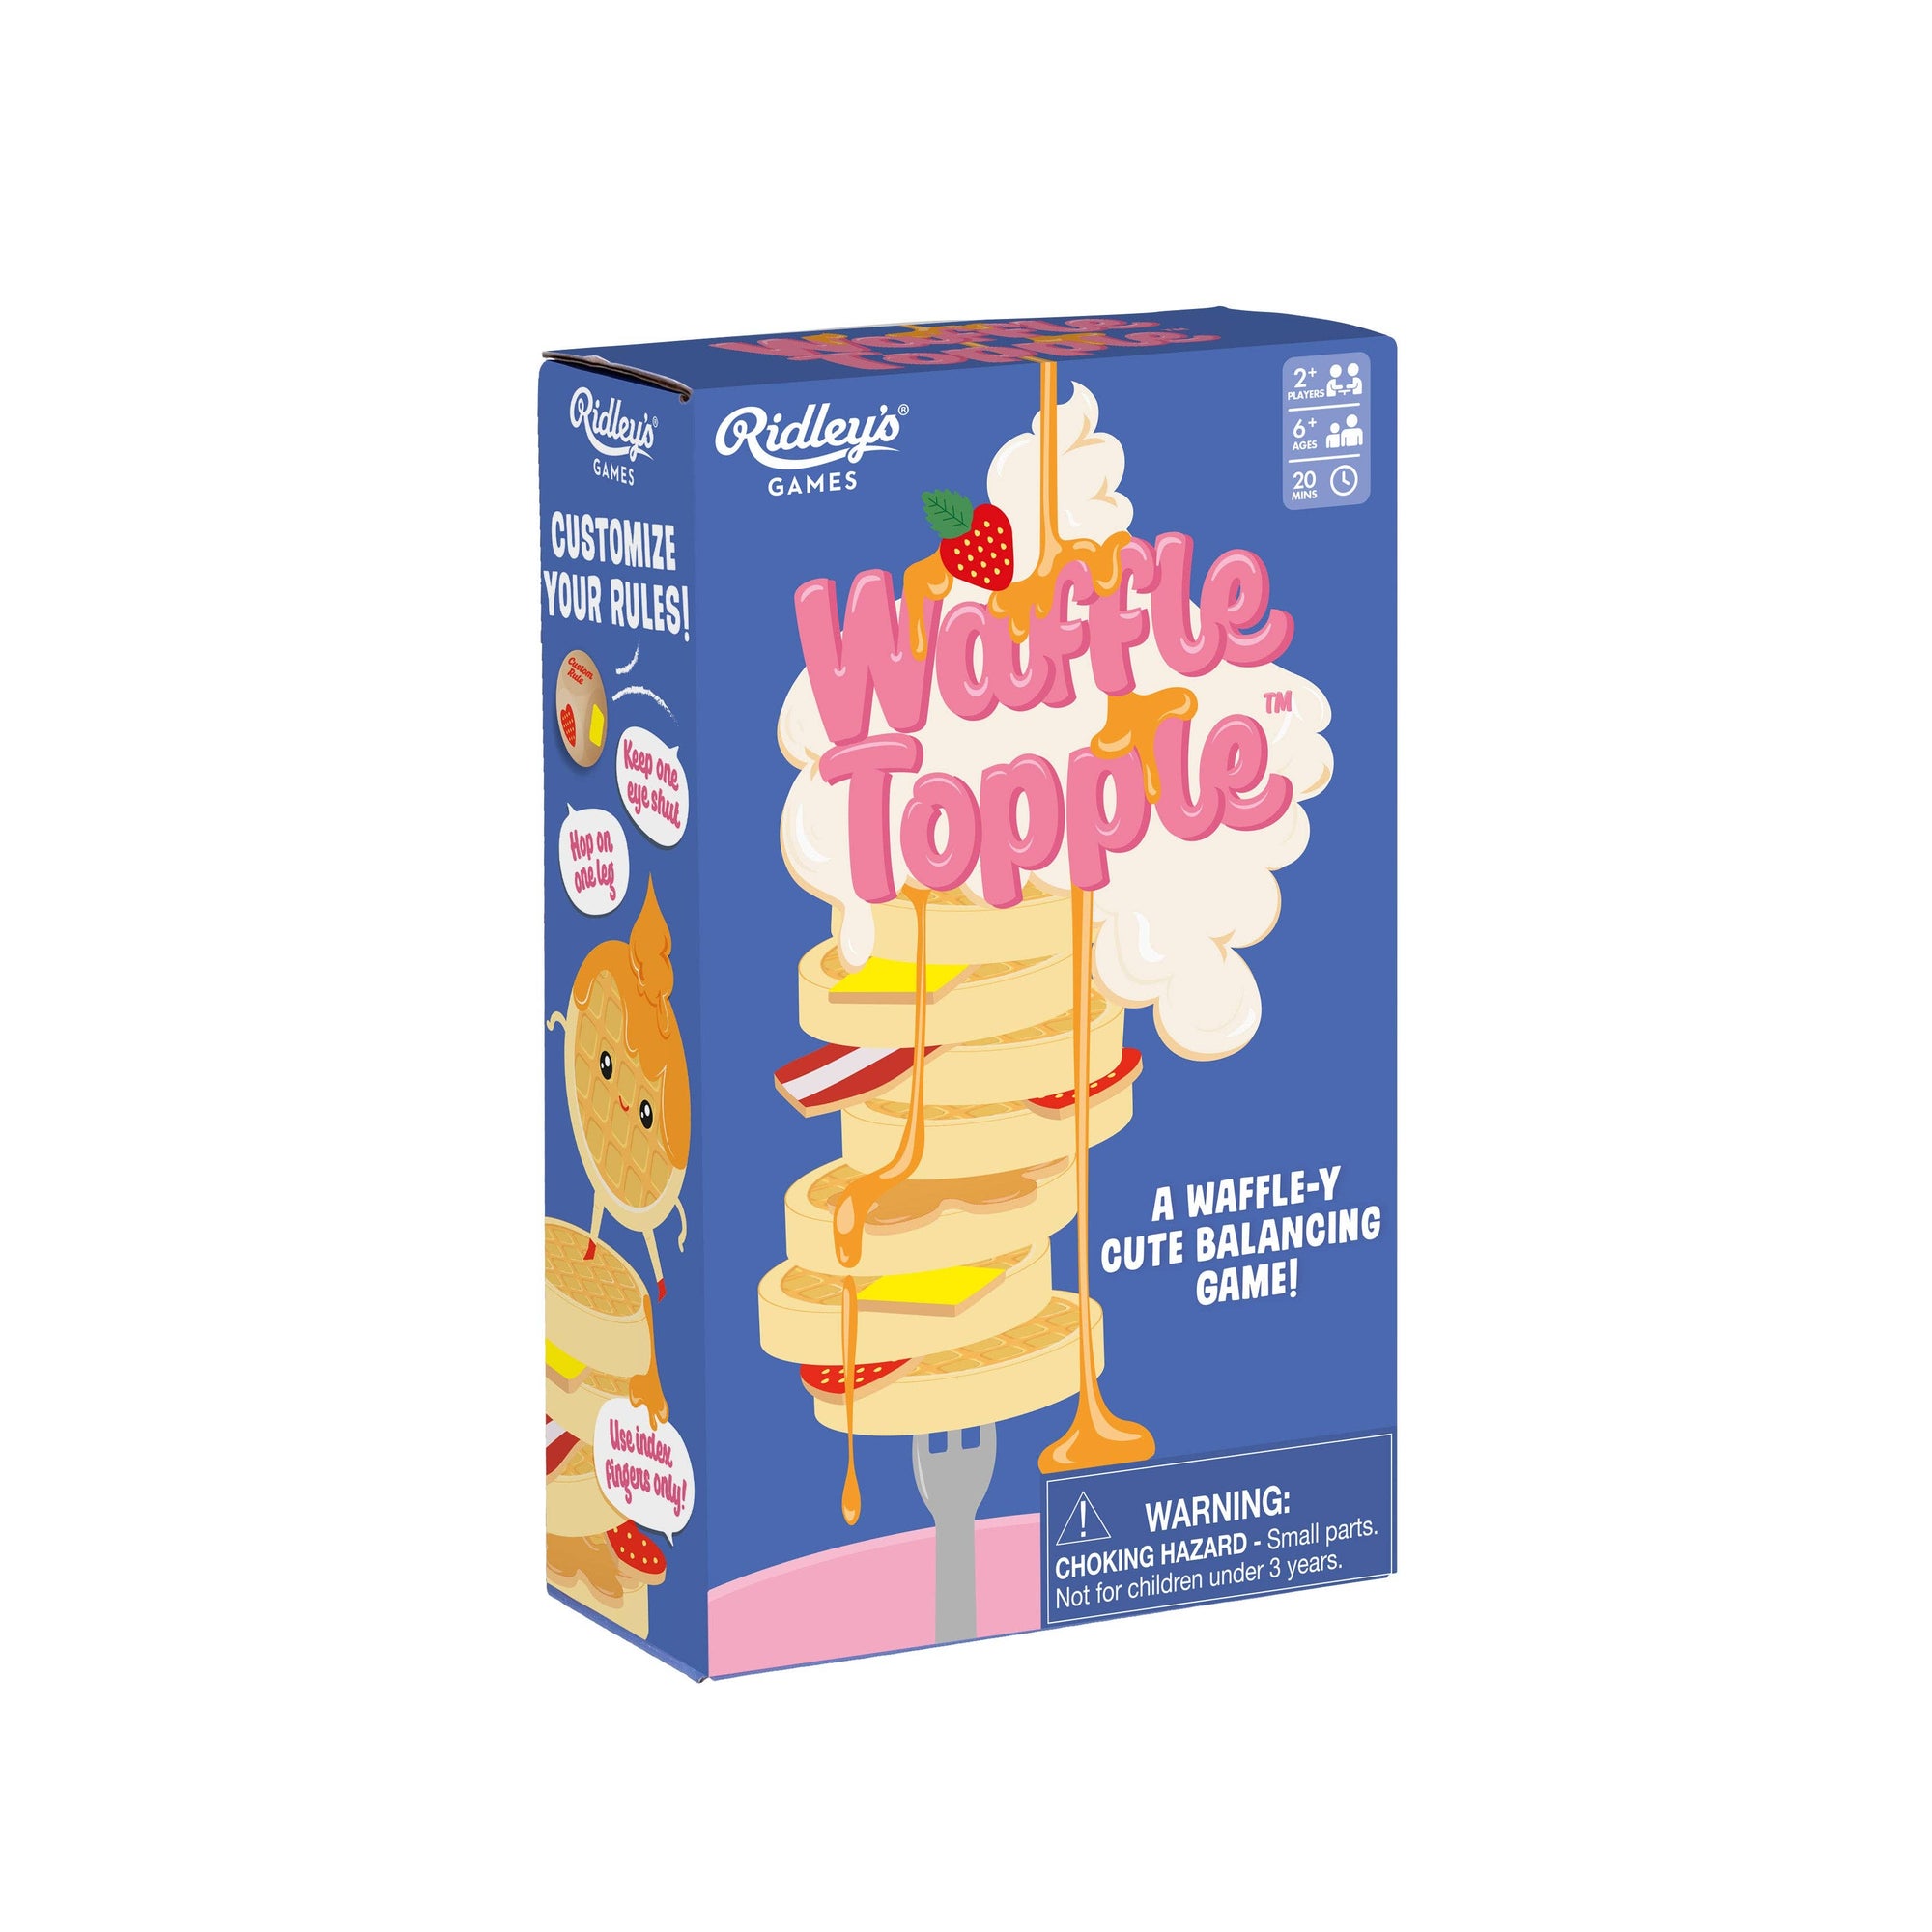 A box of Waffle Topple, perfect for a fun stacking game requiring steady hands.